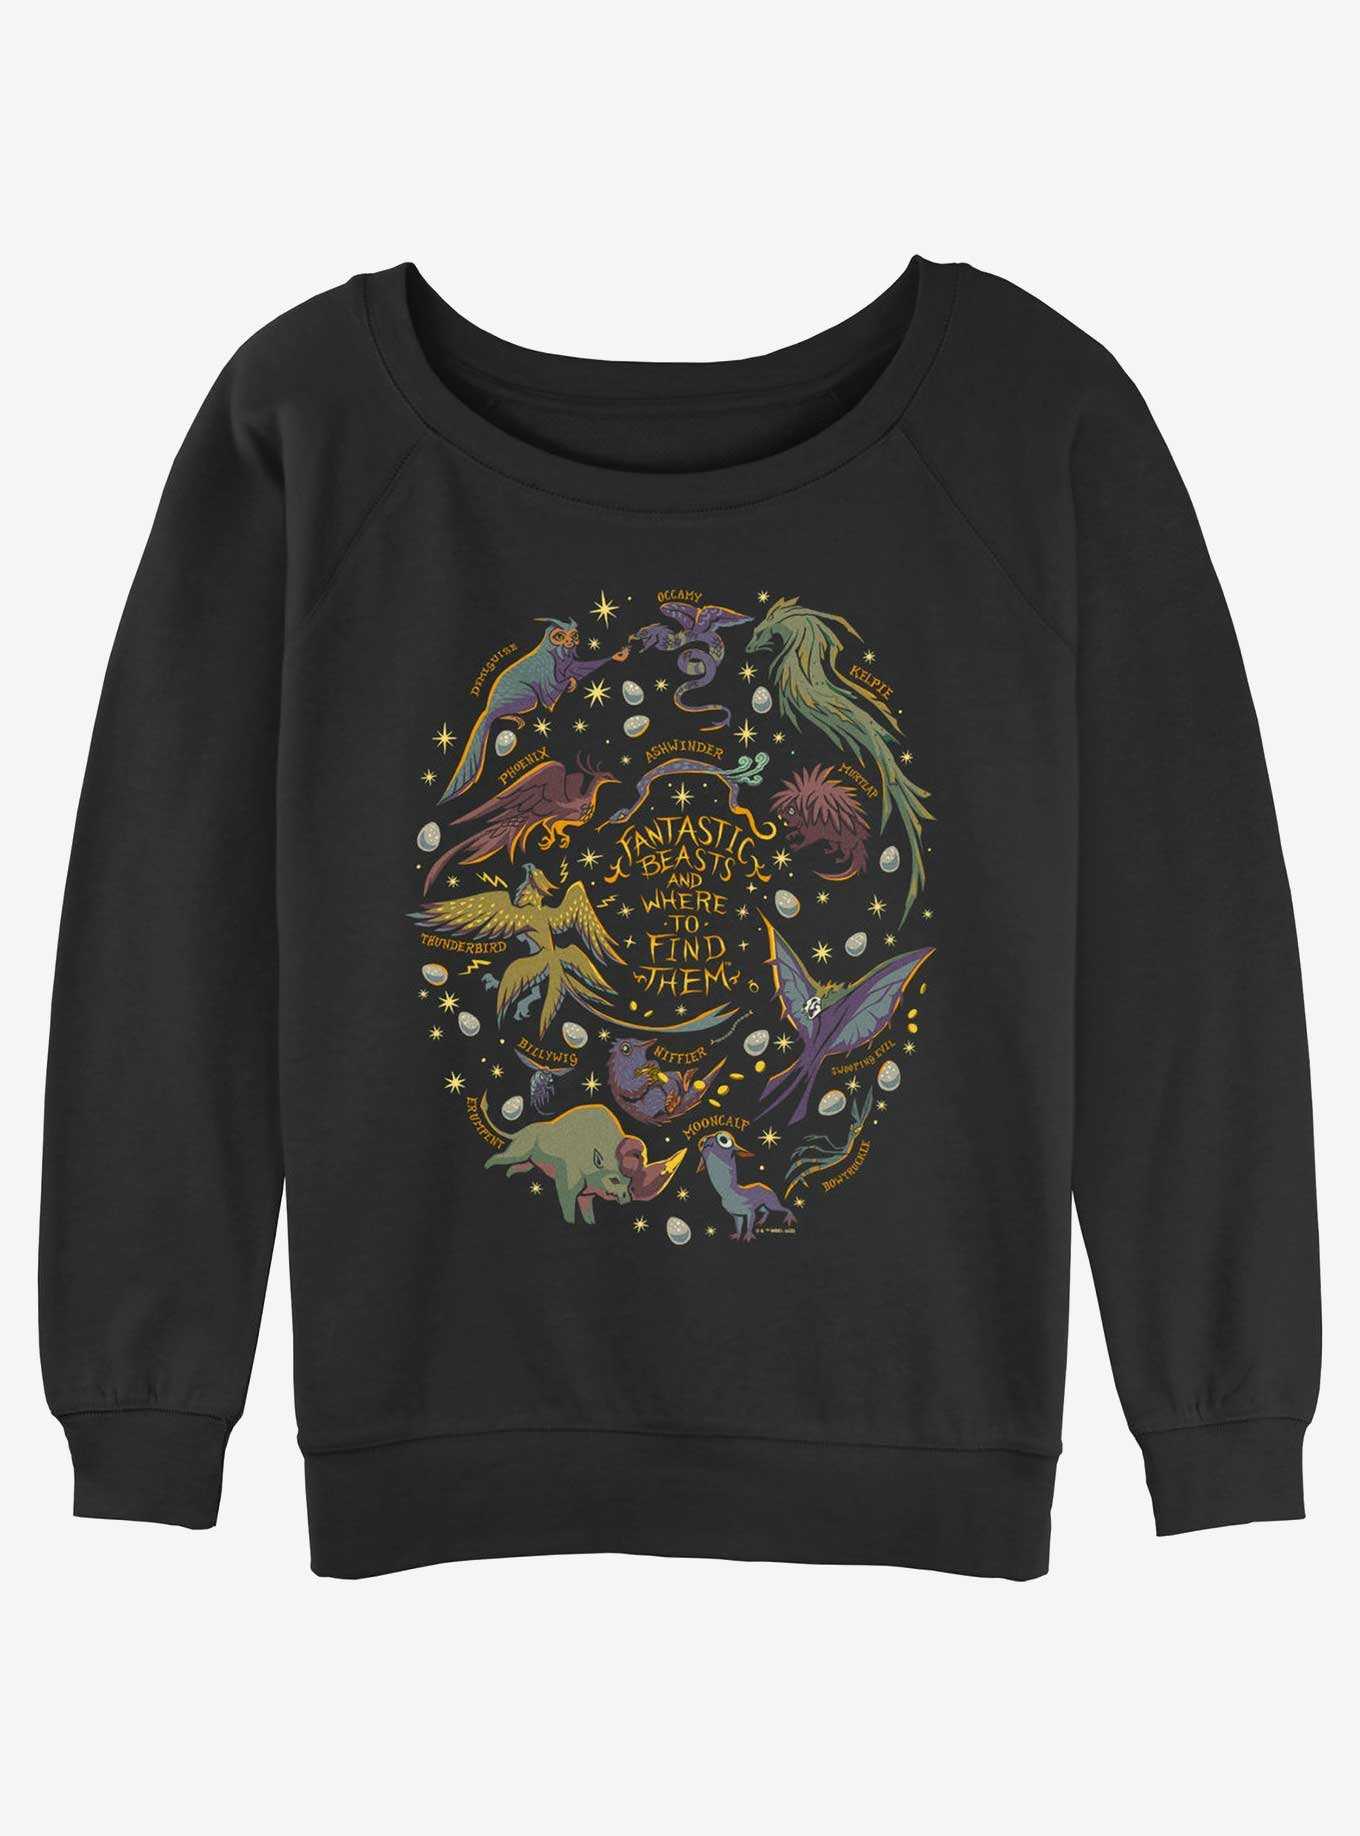 Fantastic Beasts and Where to Find Them Species Womens Slouchy Sweatshirt, , hi-res